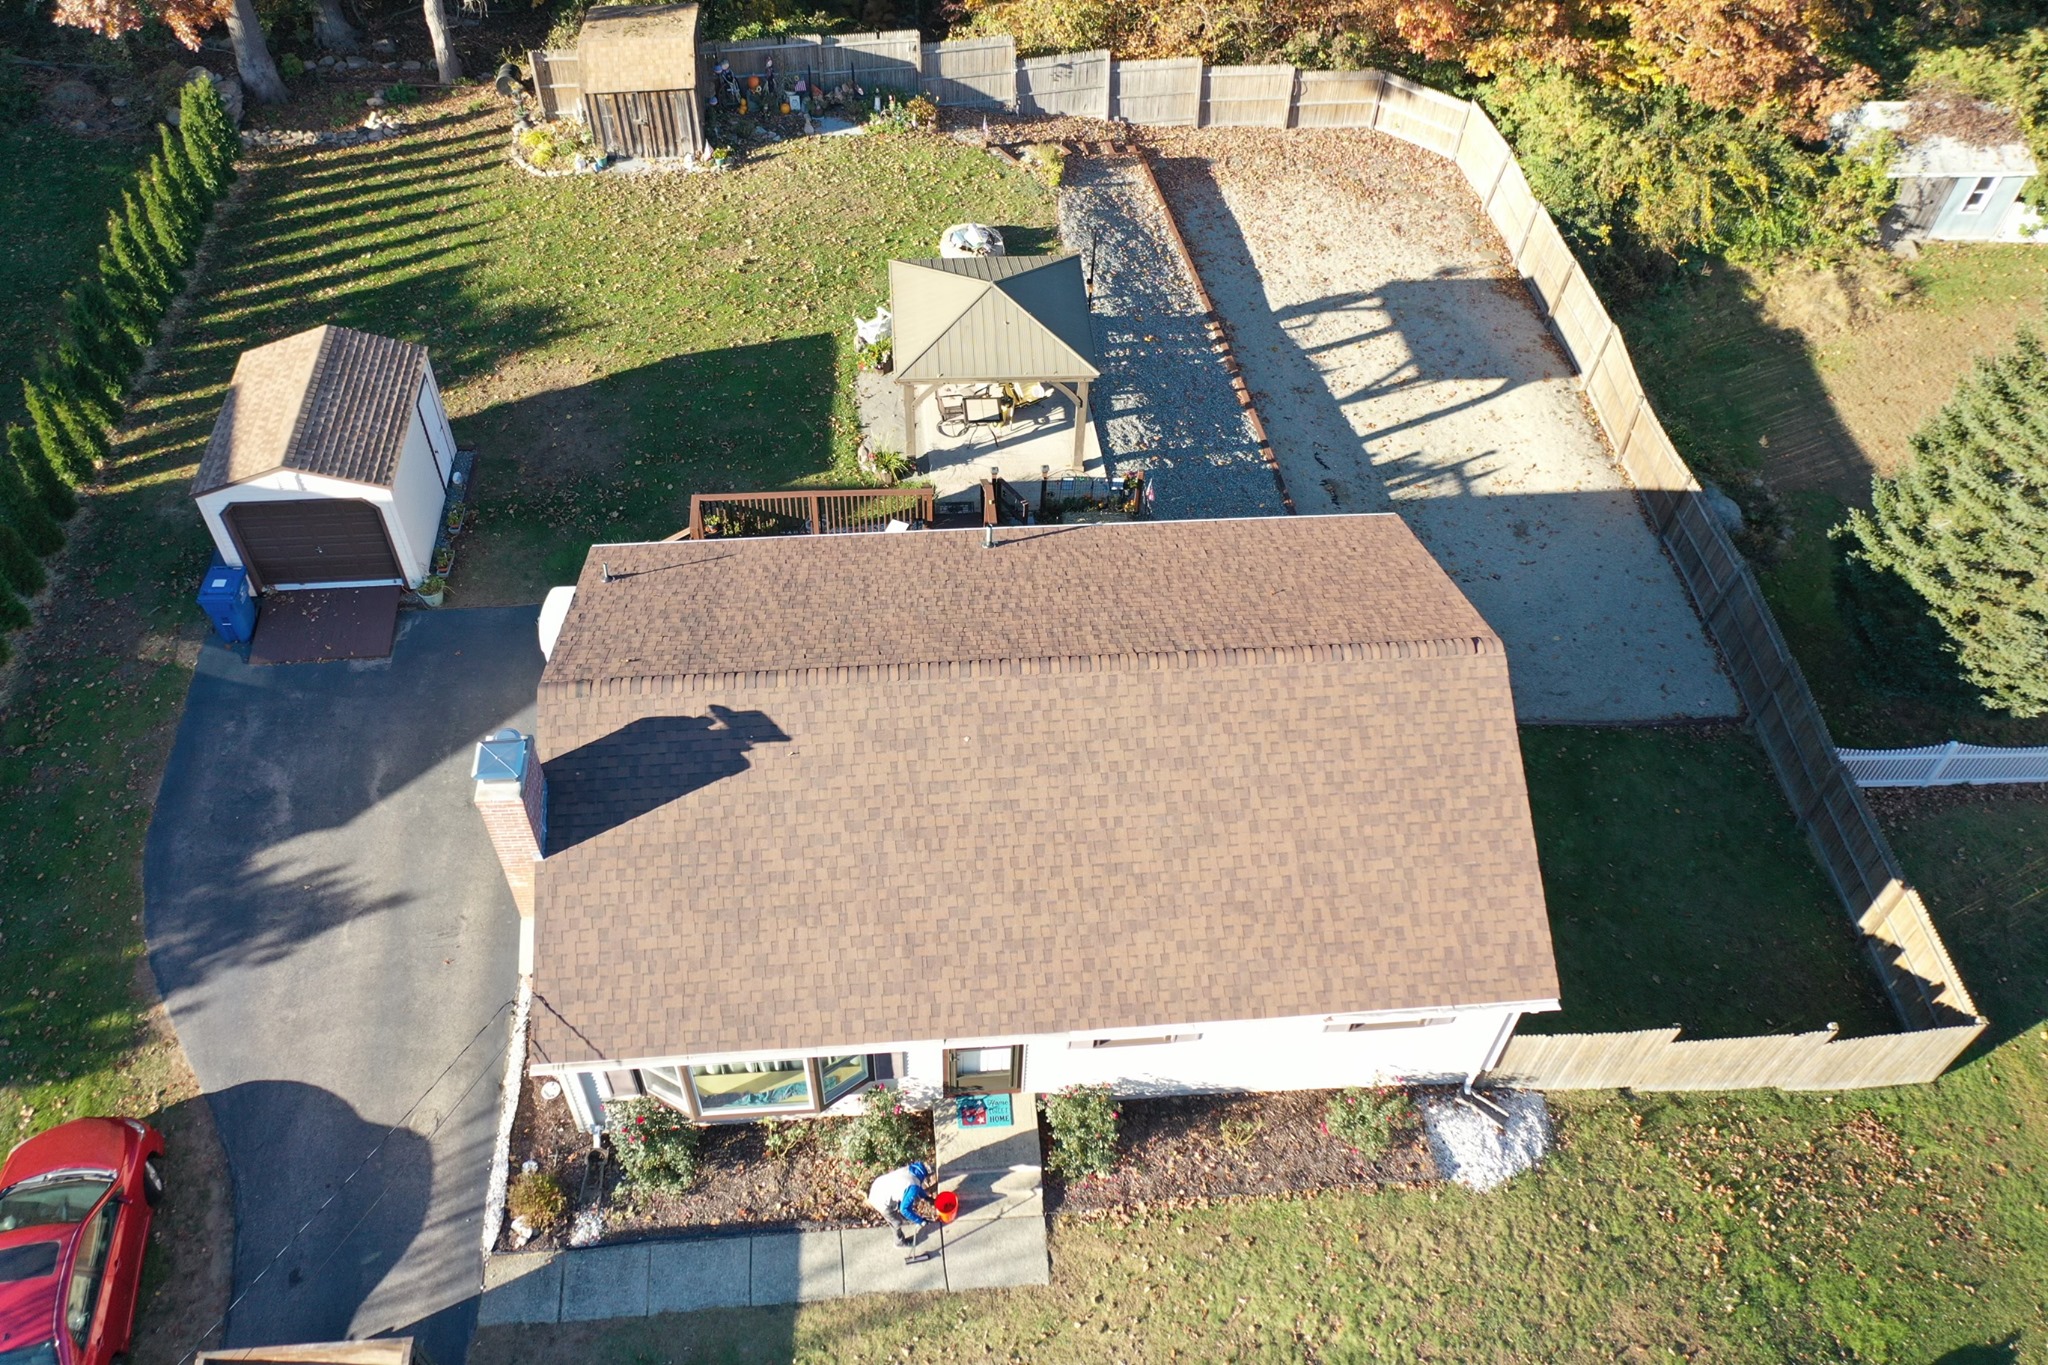 Oakdale CT Roof Replacement 3 BP Builder Company in CT | Roofer, Roof Replacement, CT Roofing Company & General Contractor CT